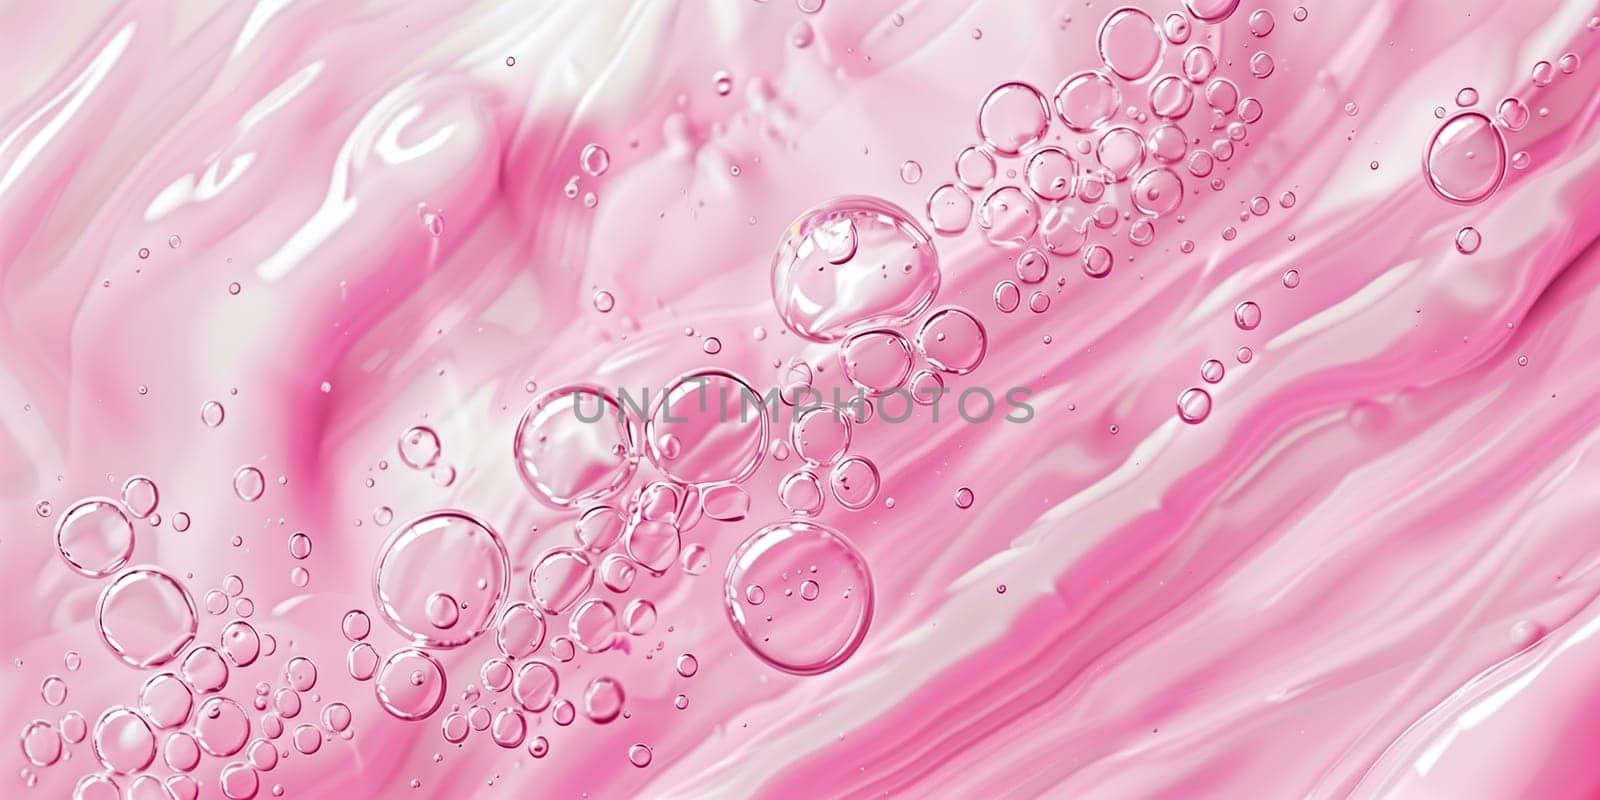 Pink gel texture. Cosmetic clear liquid cream smudge. Transparent skin care product sample closeup. Hand sanitizer, alcohol gel background